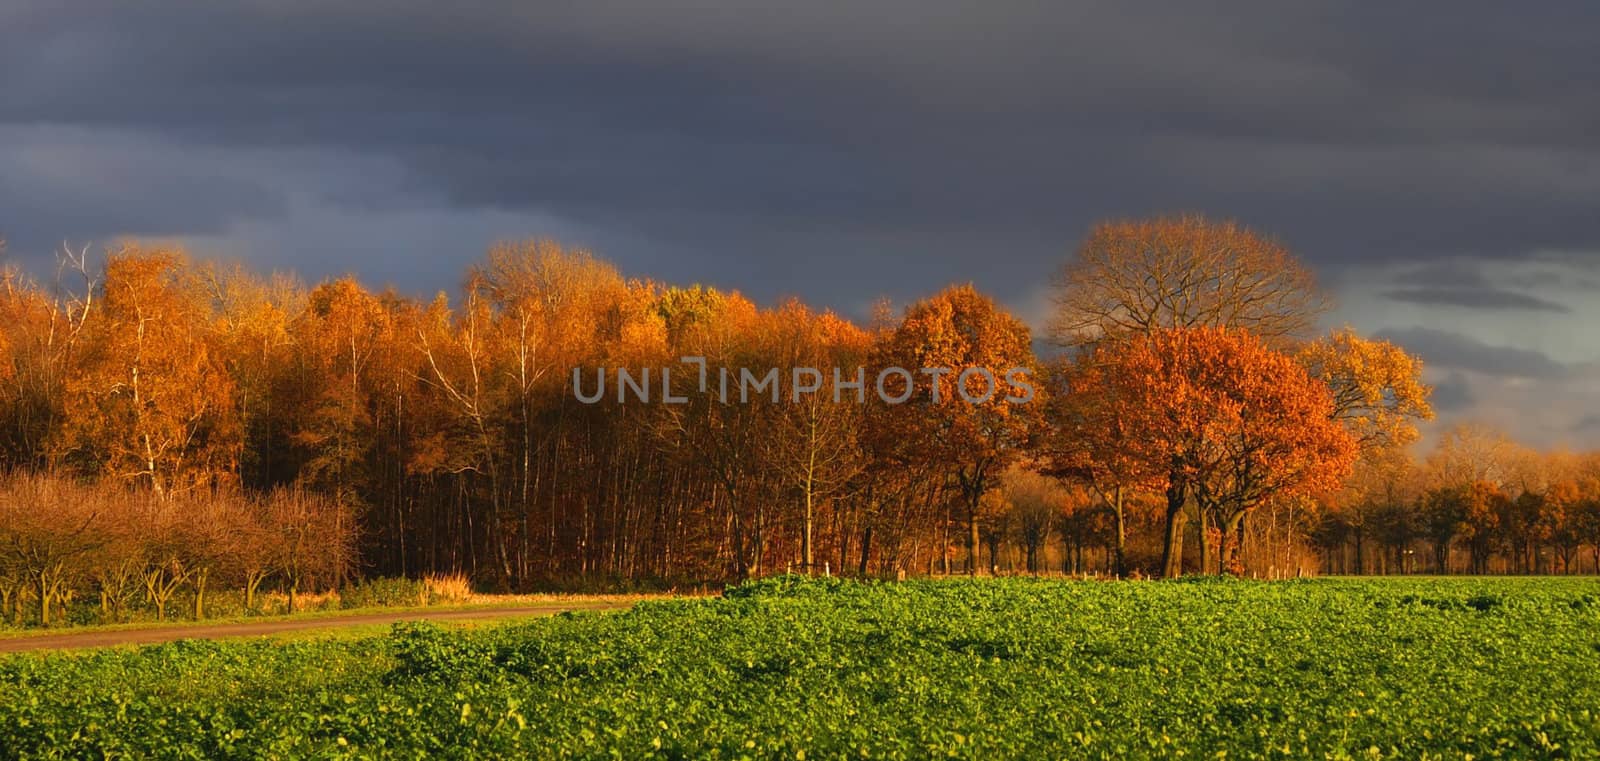 autumn scenery of some nice colored trees with  green farmland field of vegetables on a dark cloudy day
